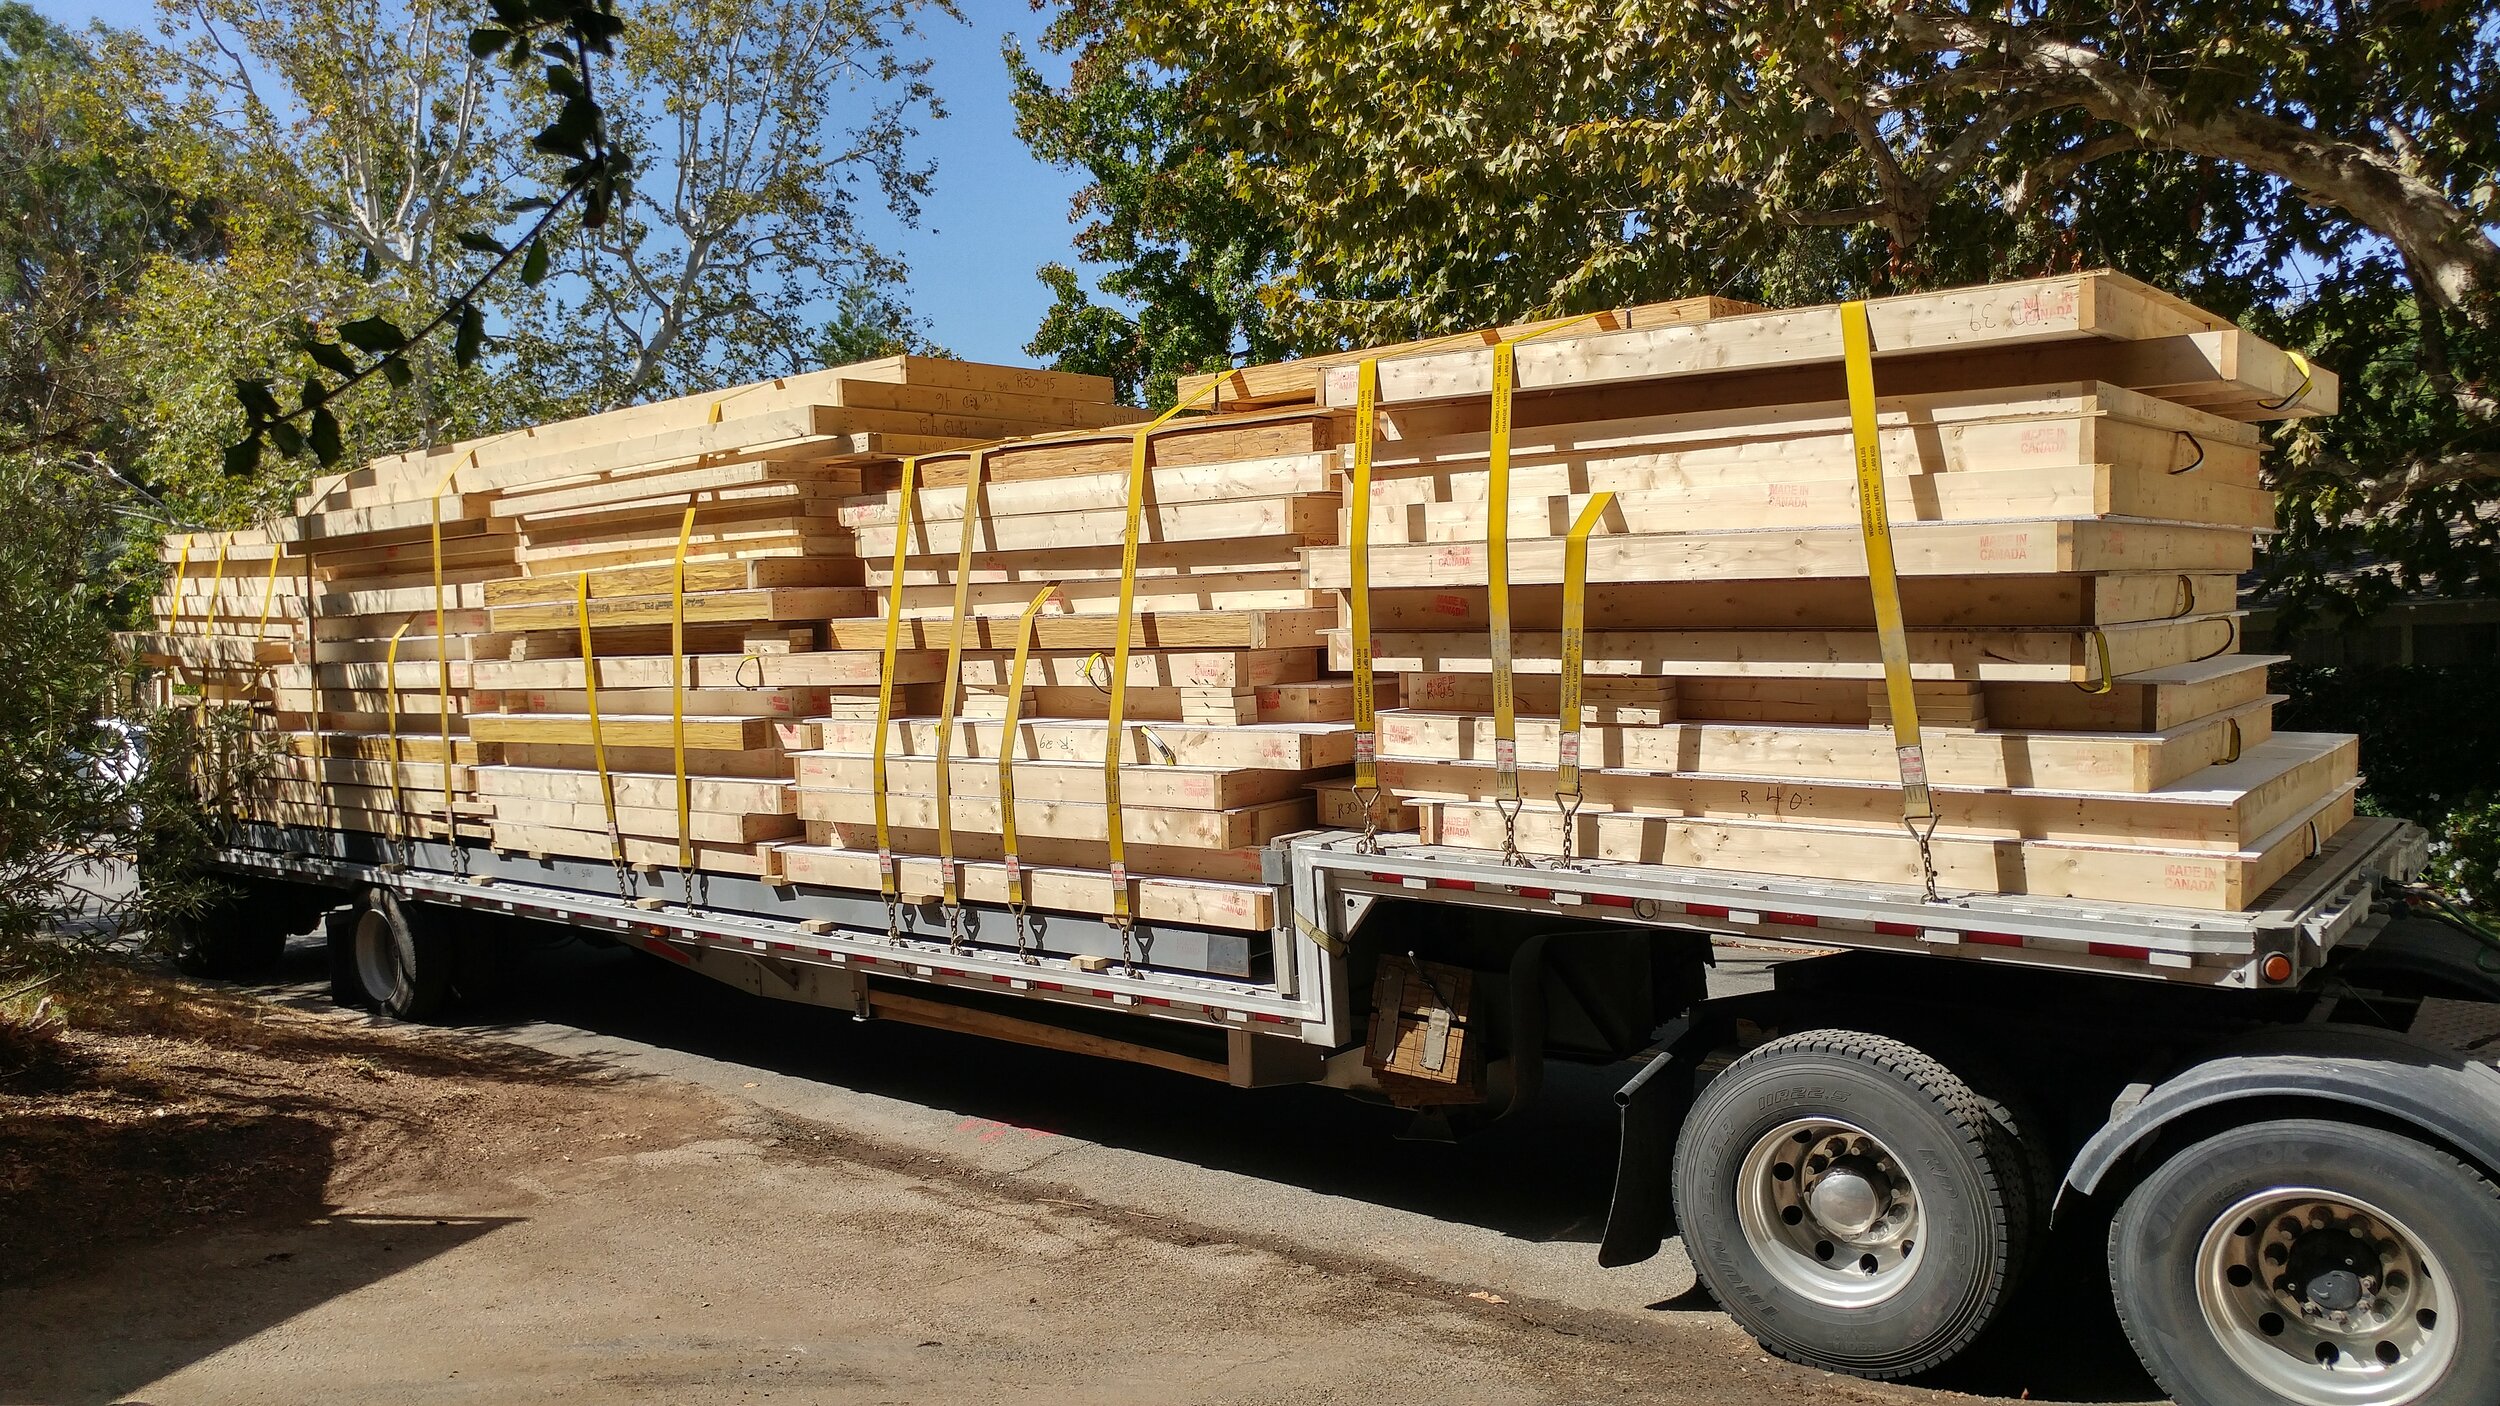 Wooden building components packed and secured onto a flatbed truck